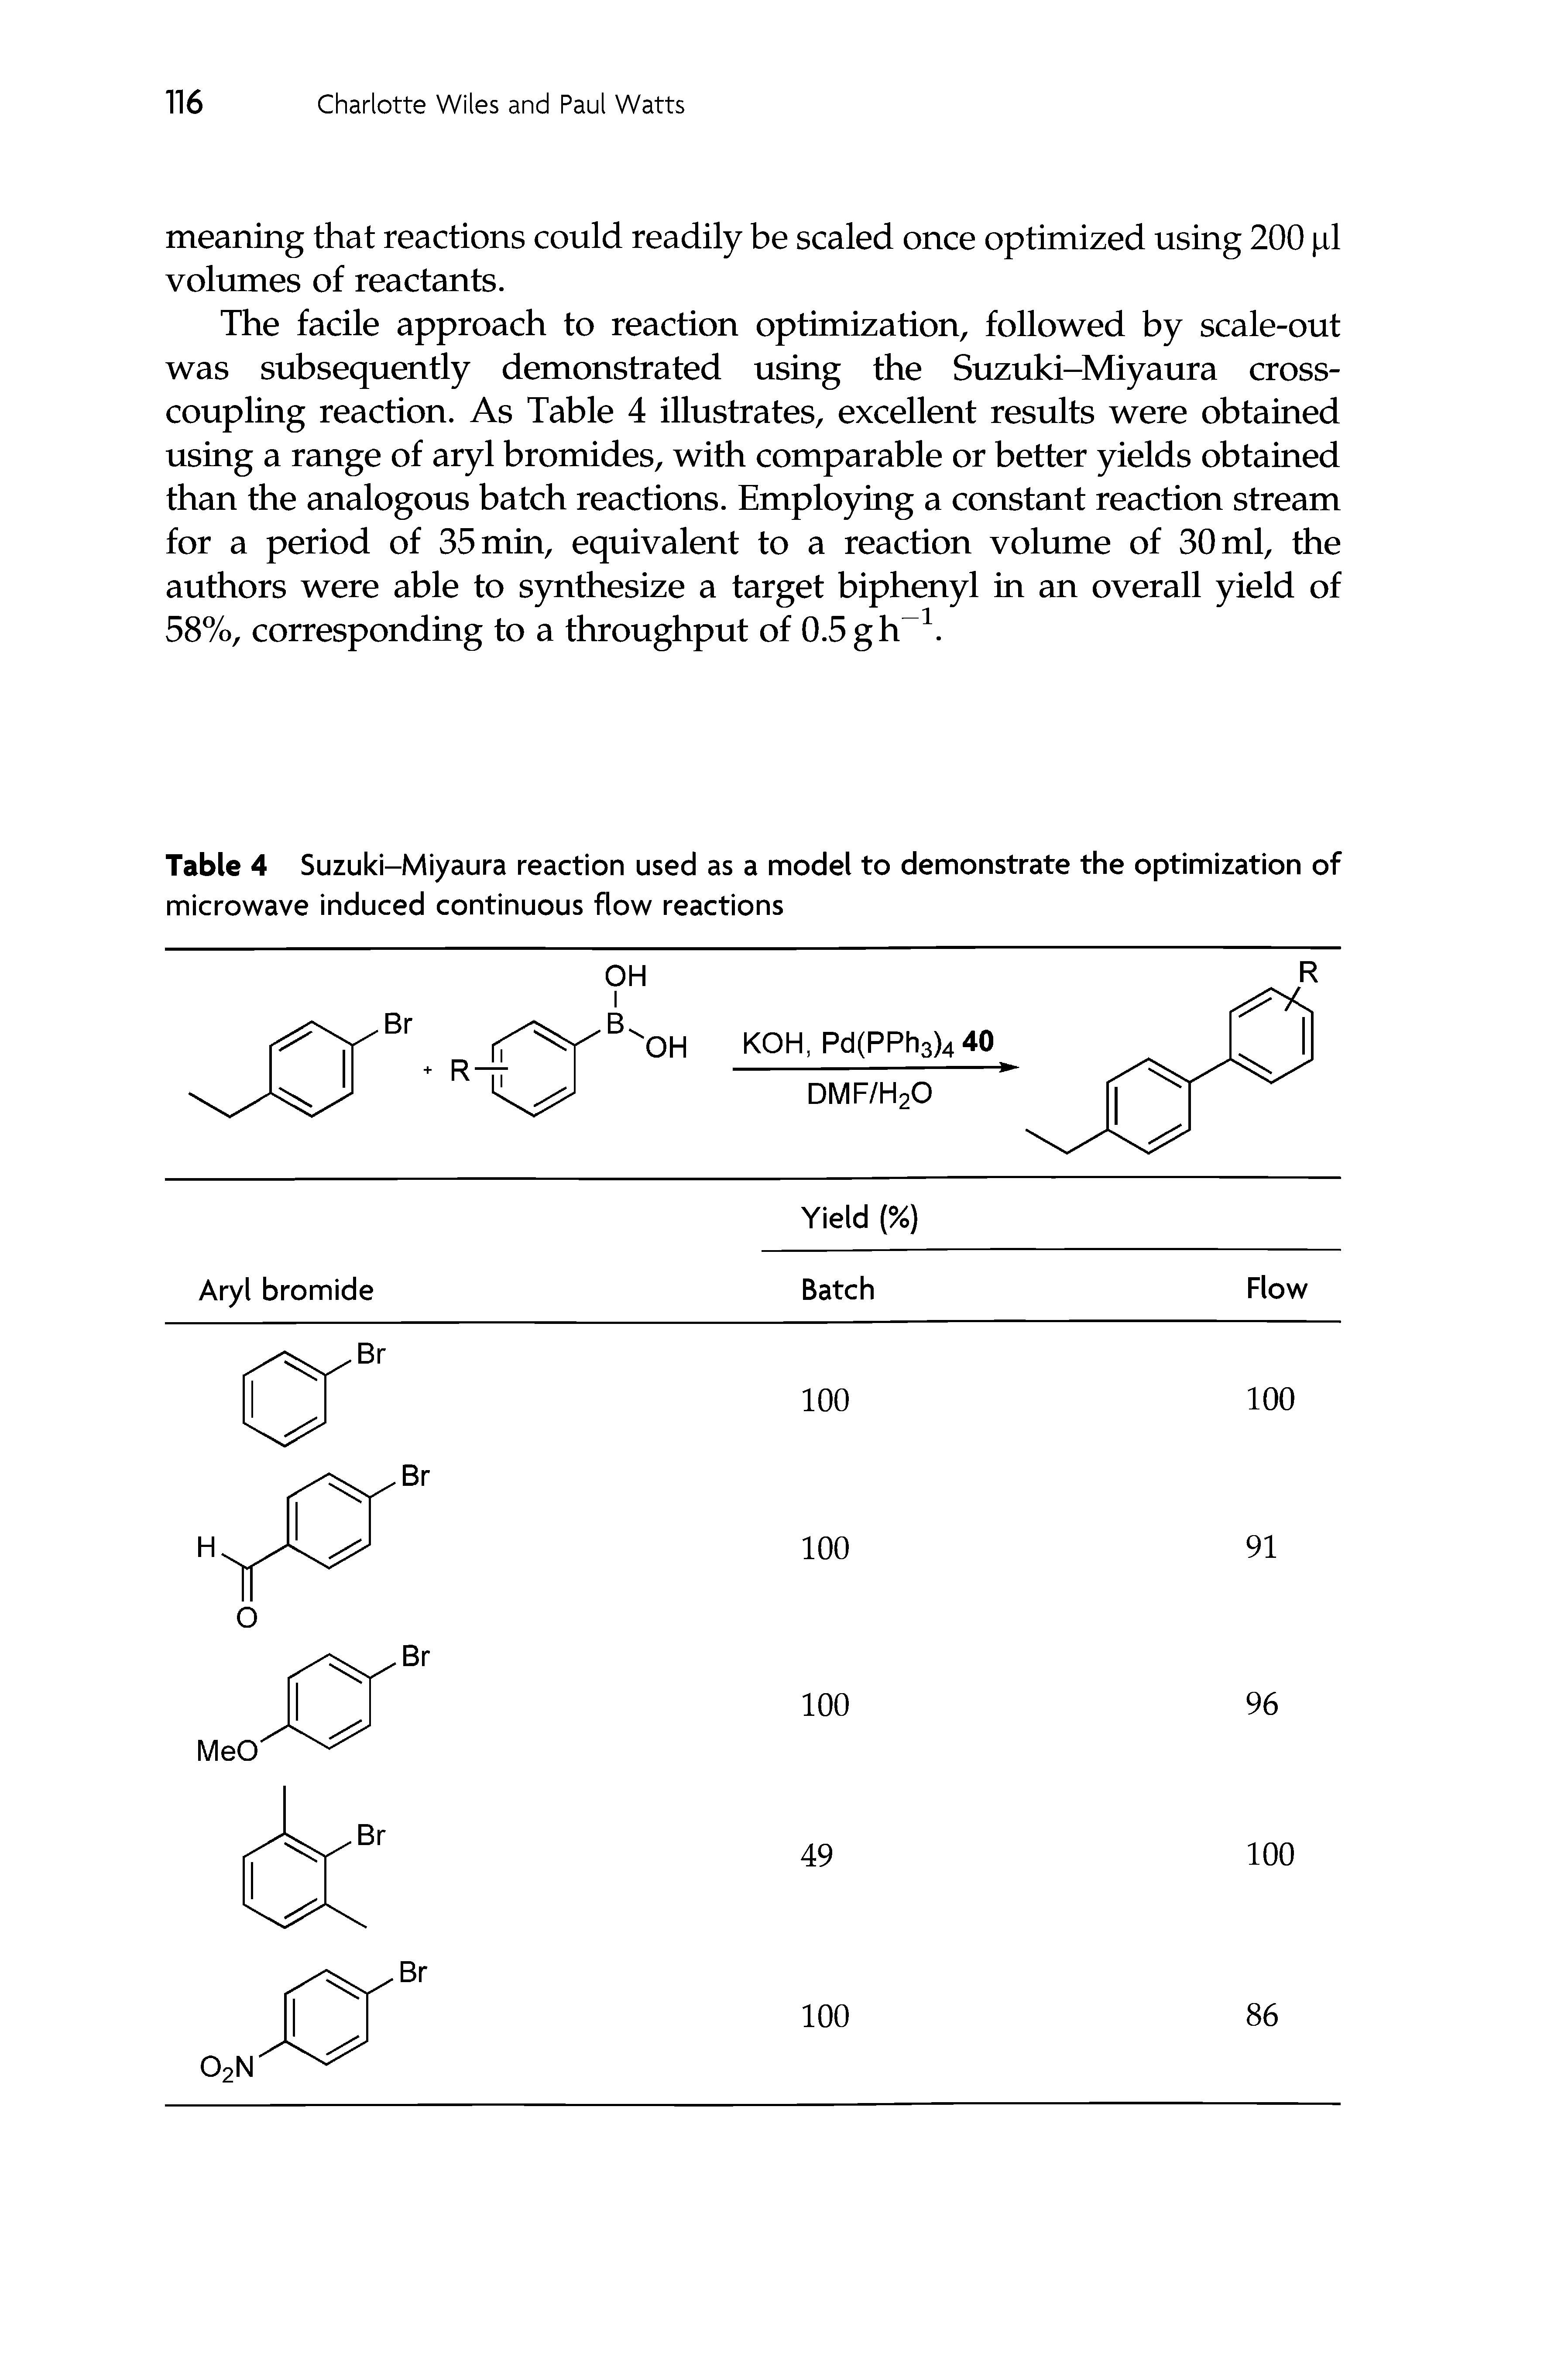 Table 4 Suzuki-Miyaura reaction used as a model to demonstrate the optimization of microwave induced continuous flow reactions...